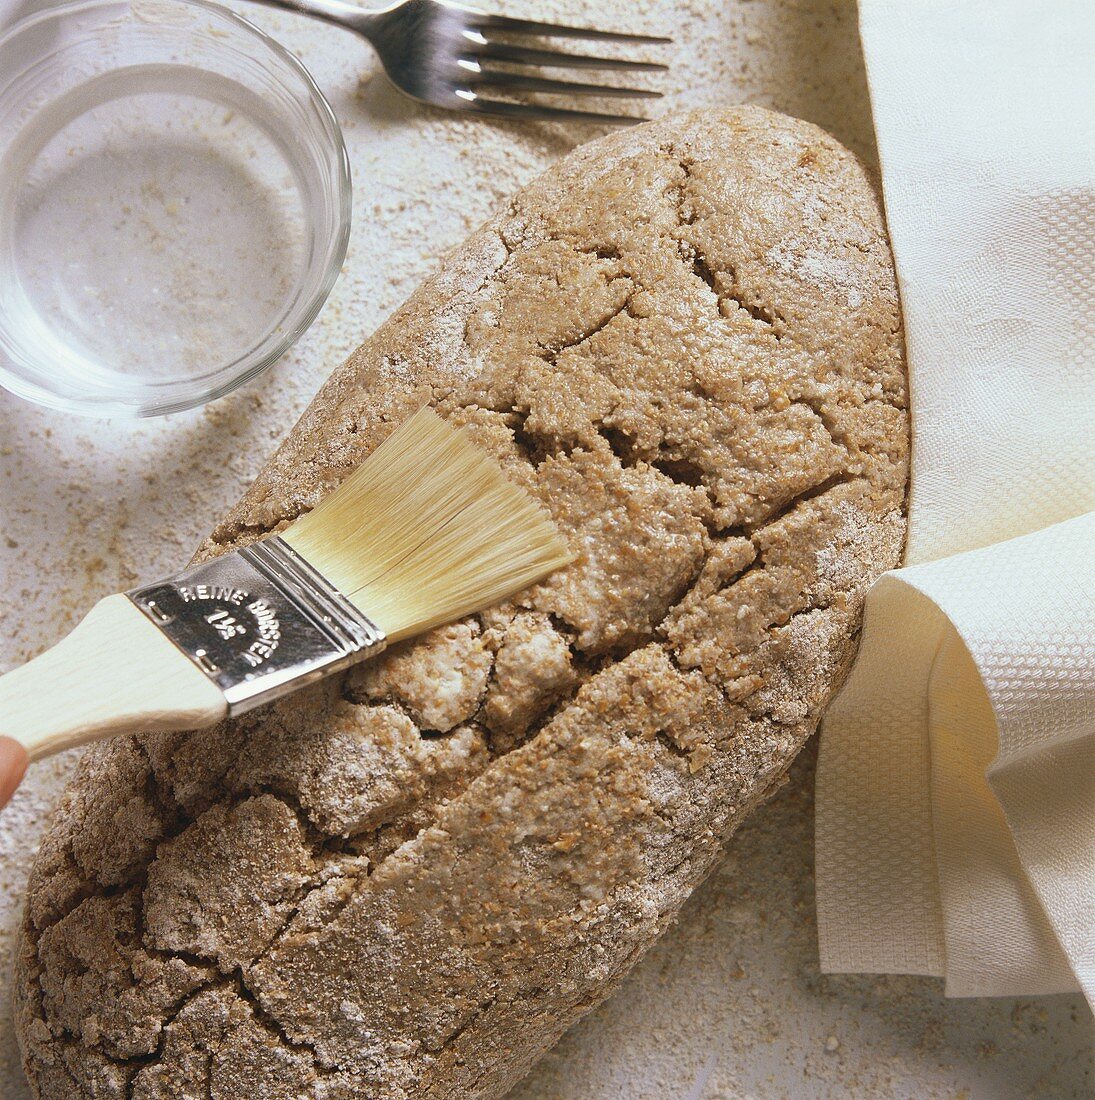 Making brown bread: brushing loaf with water